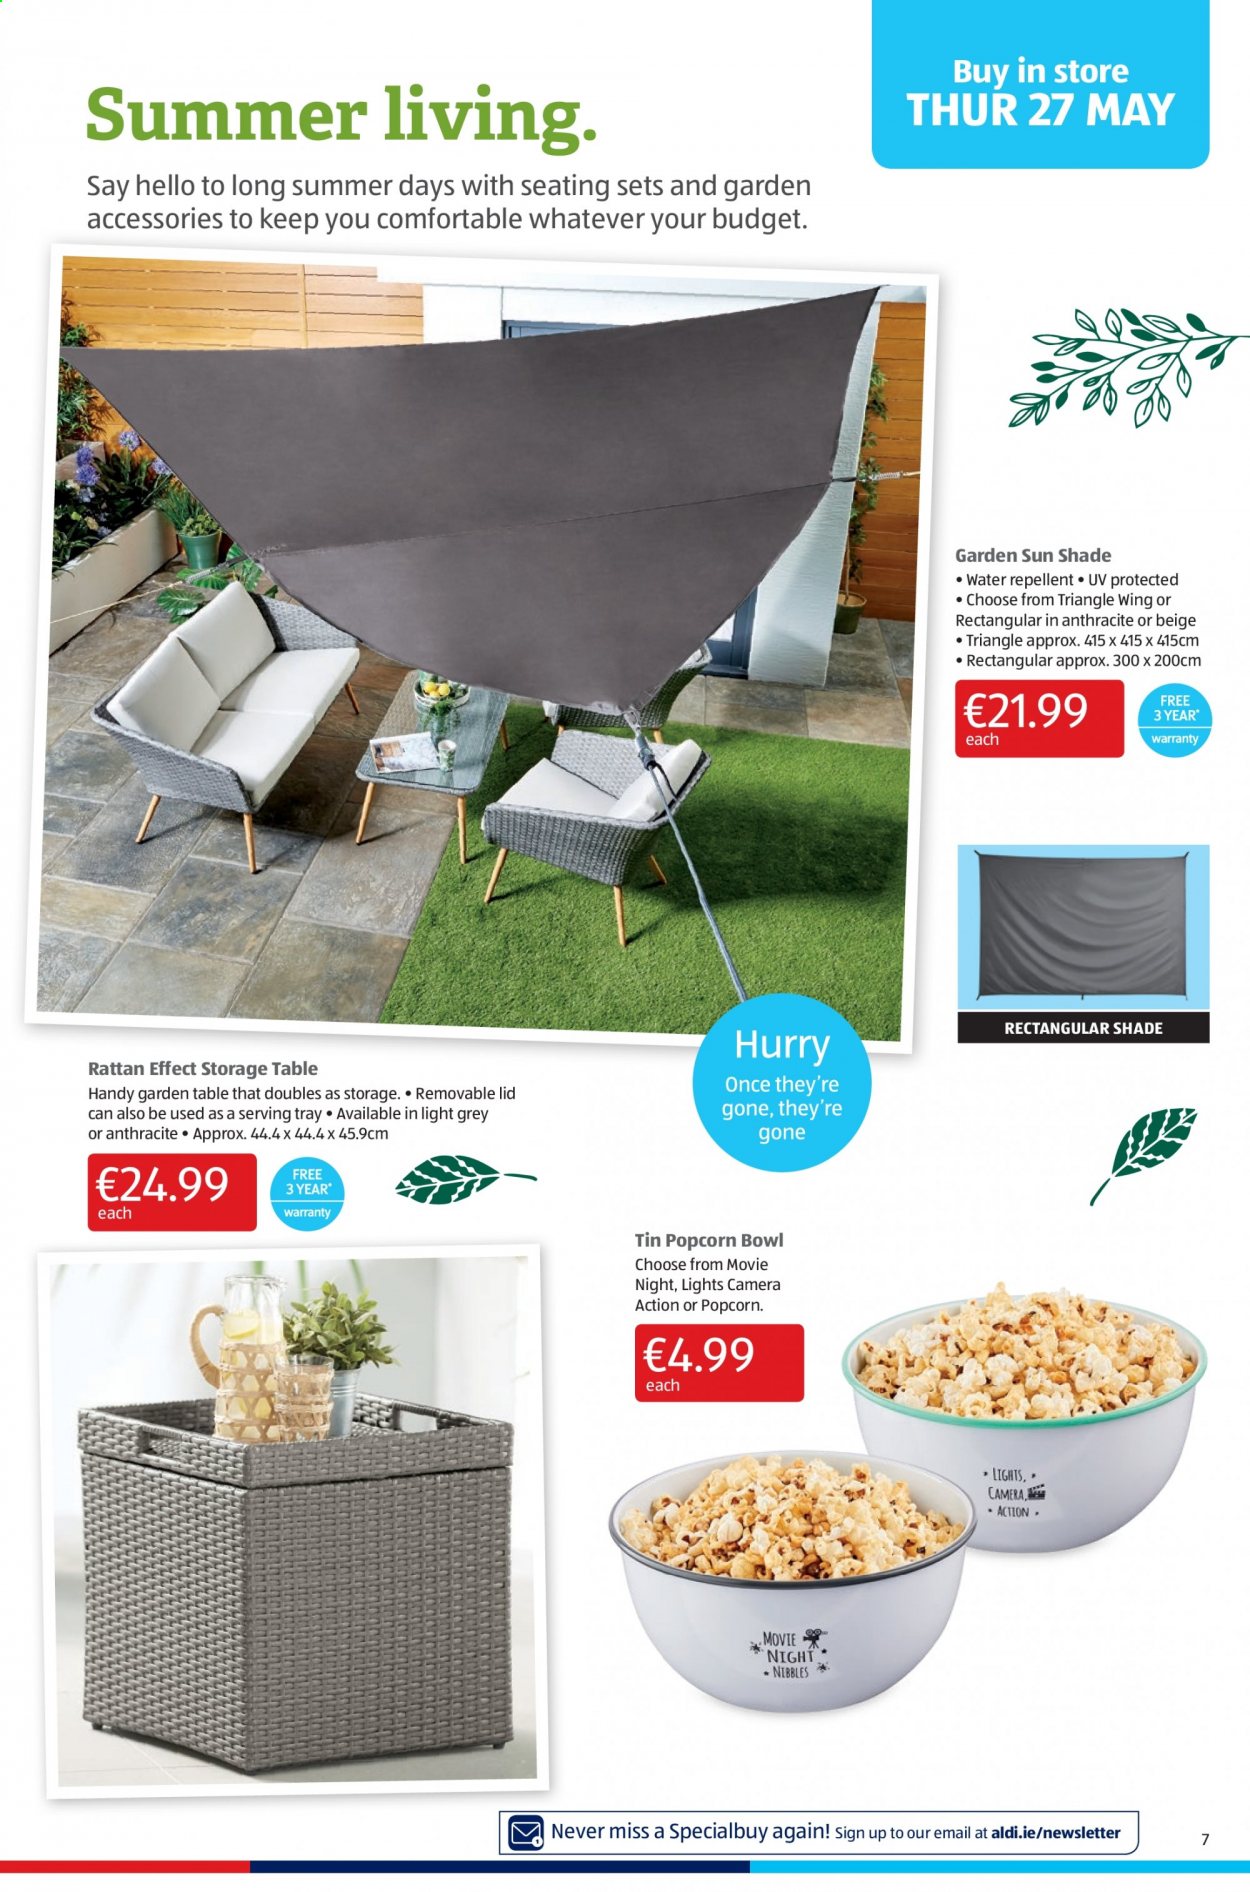 thumbnail - Aldi offer  - 27.05.2021 - 02.06.2021 - Sales products - popcorn, repellent, lid, tray, bowl, table. Page 7.